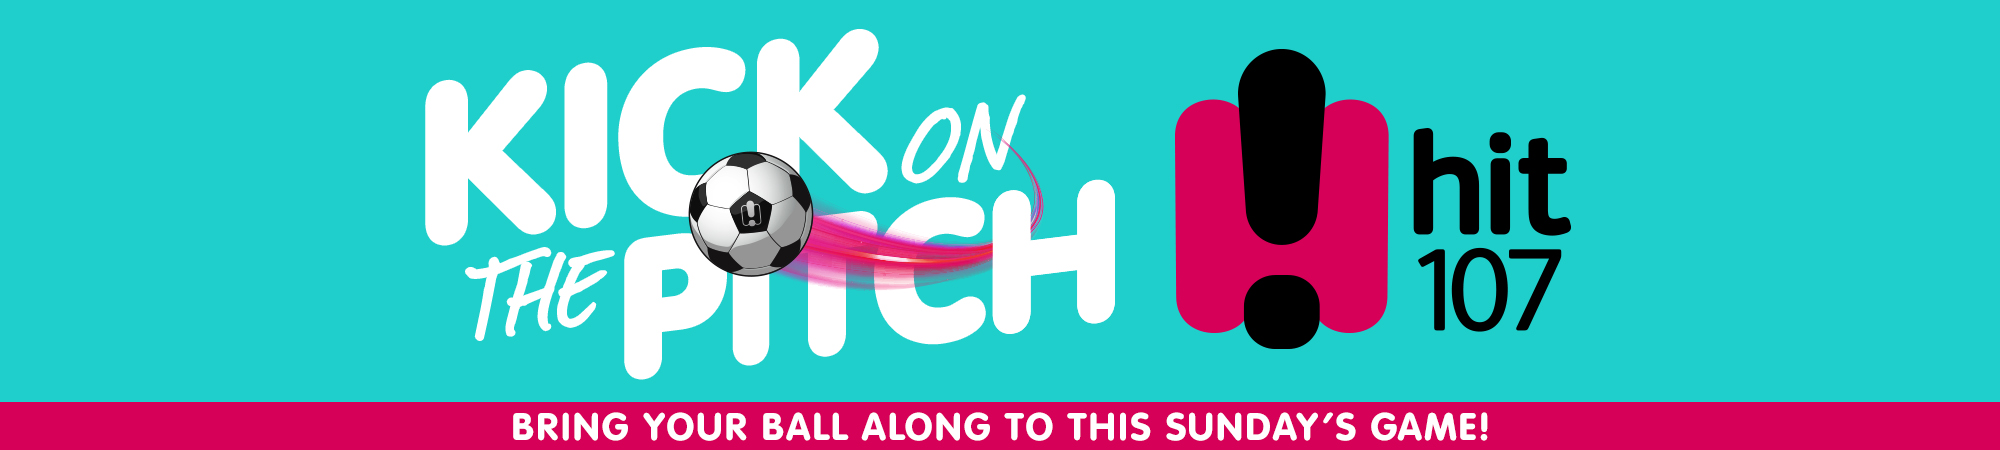 Kick on the Pitch presented by Hit 107 at Coopers Stadium